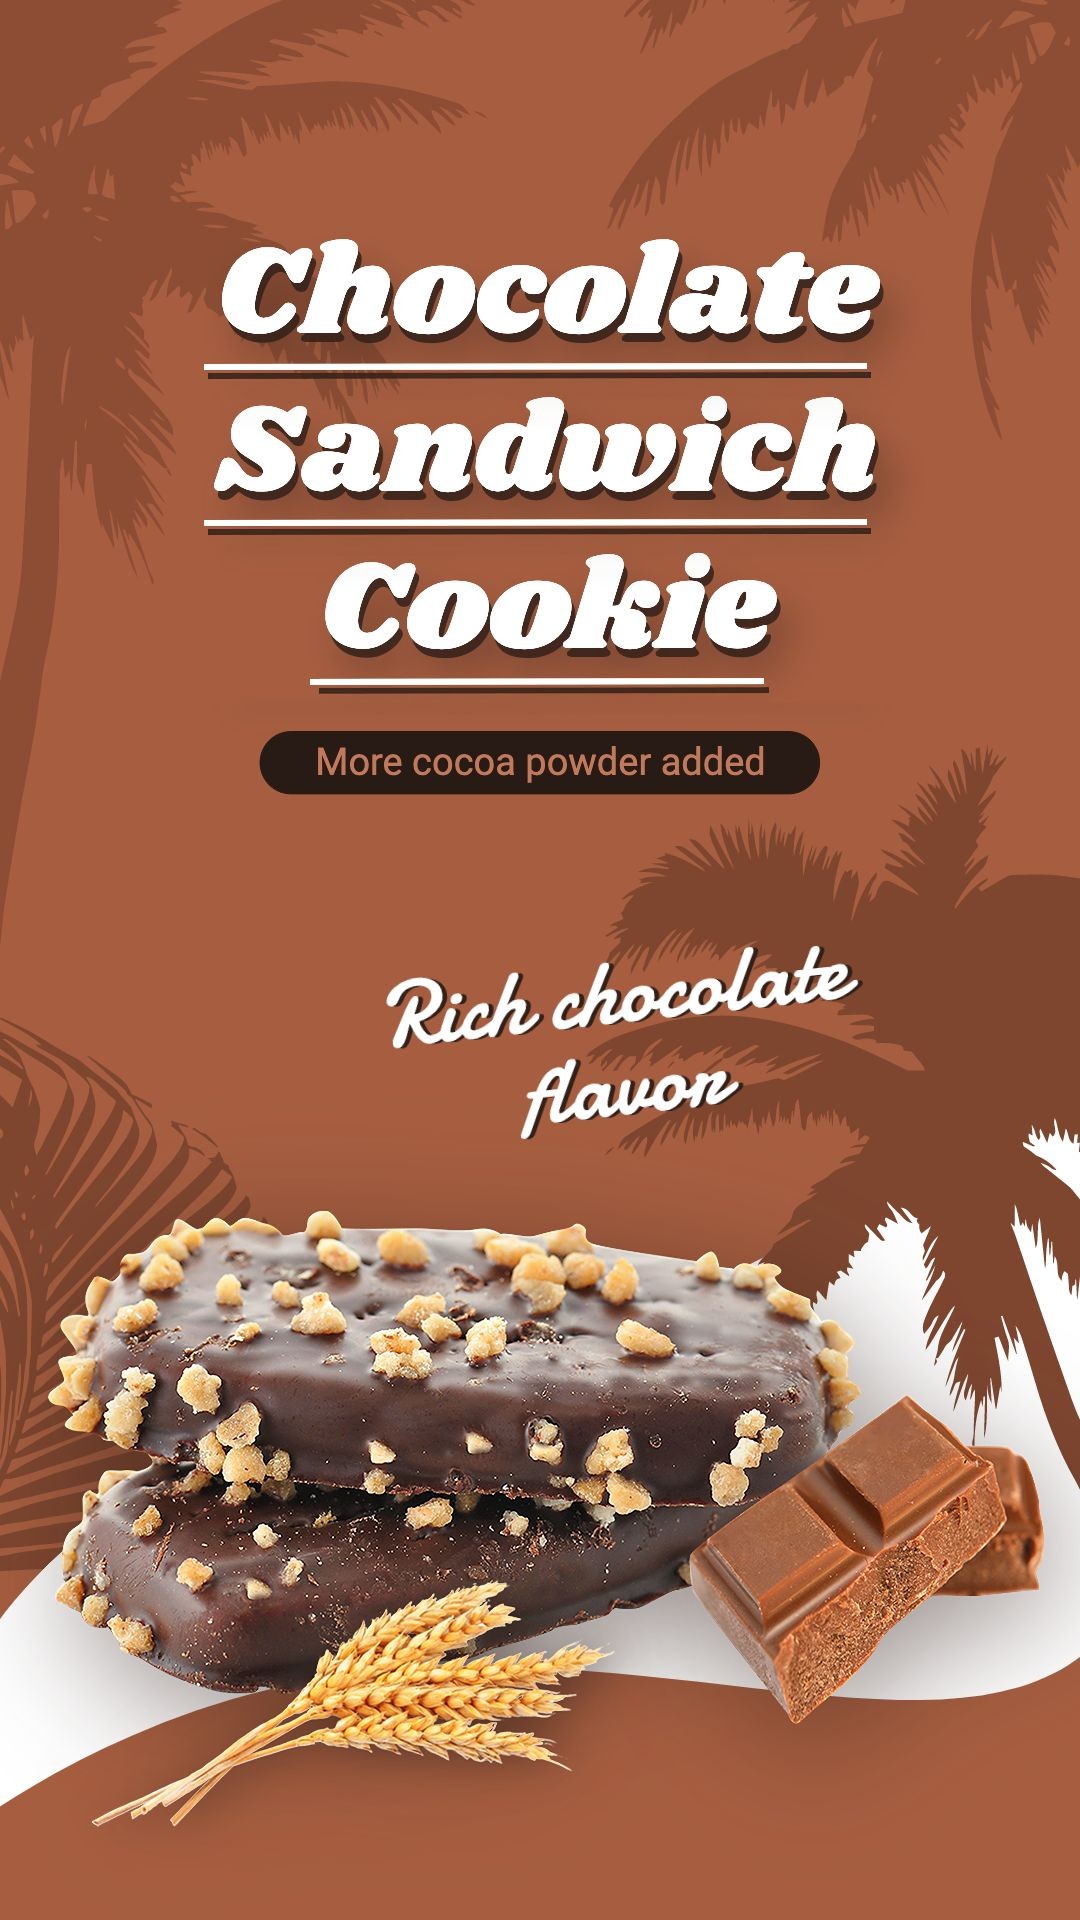 Chocolate Cookies Consumer Packaged Food Snacks Ecommerce Story 